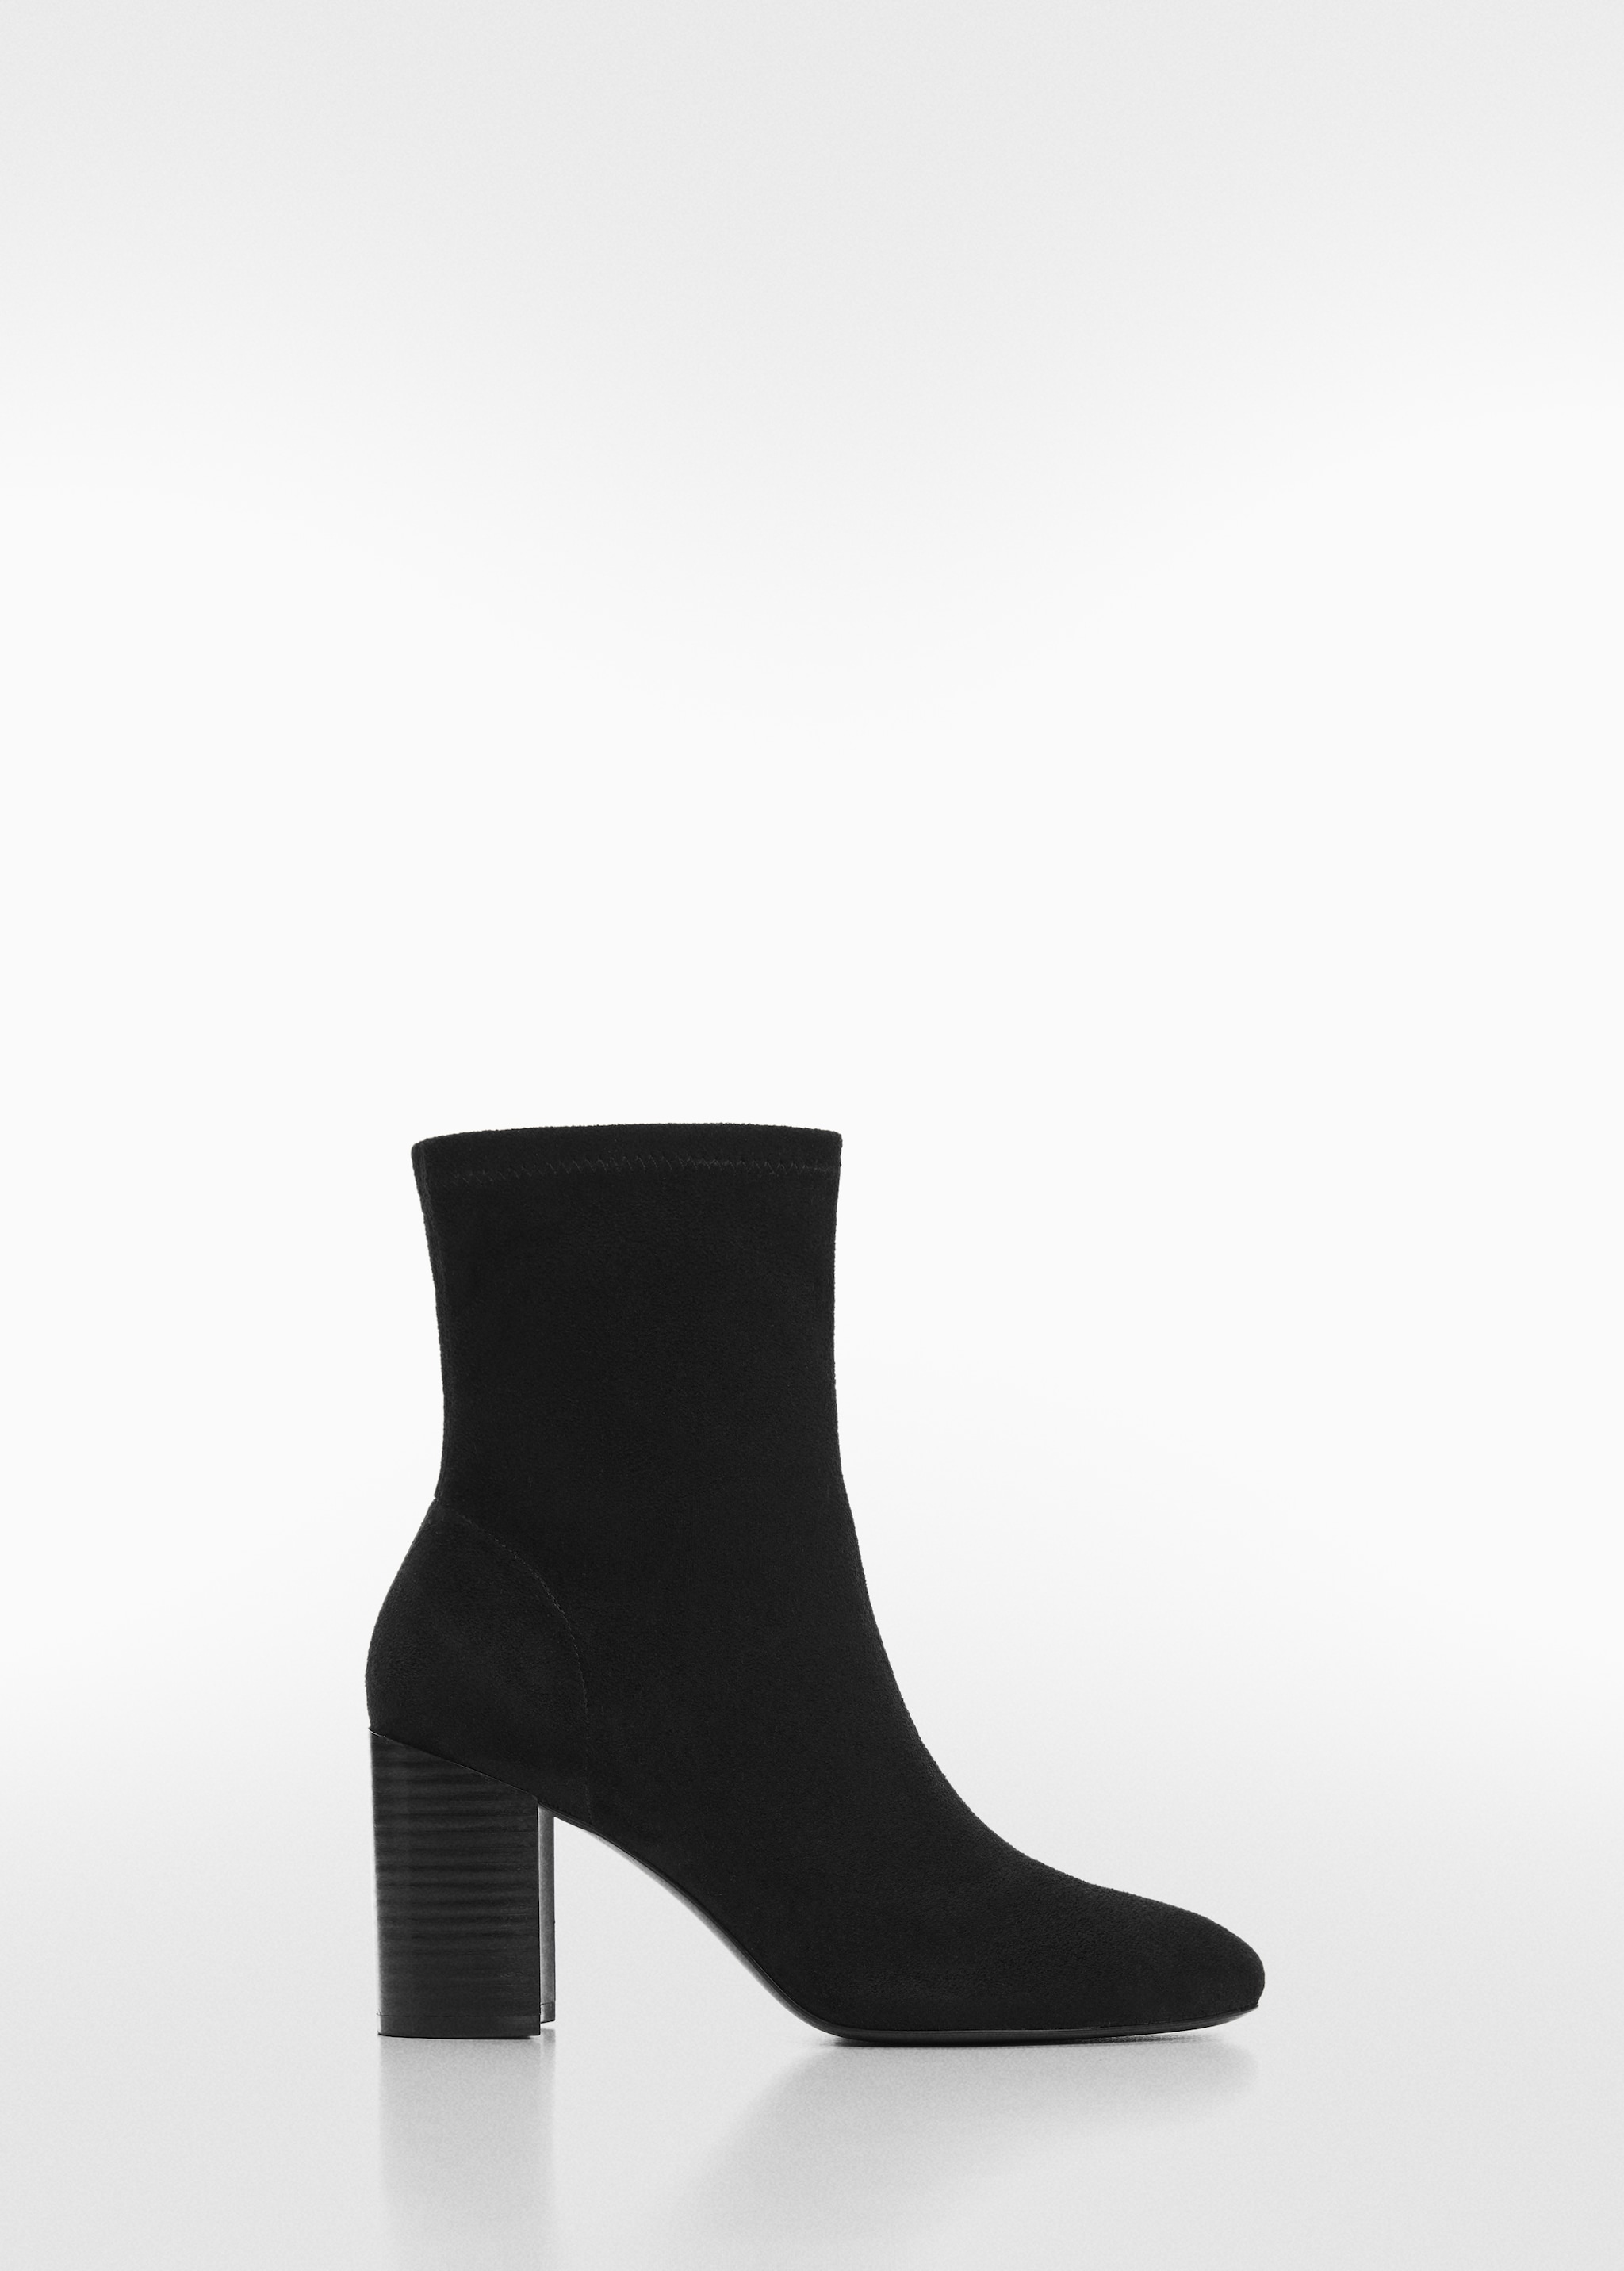 Round-toe heeled ankle boots - Article without model